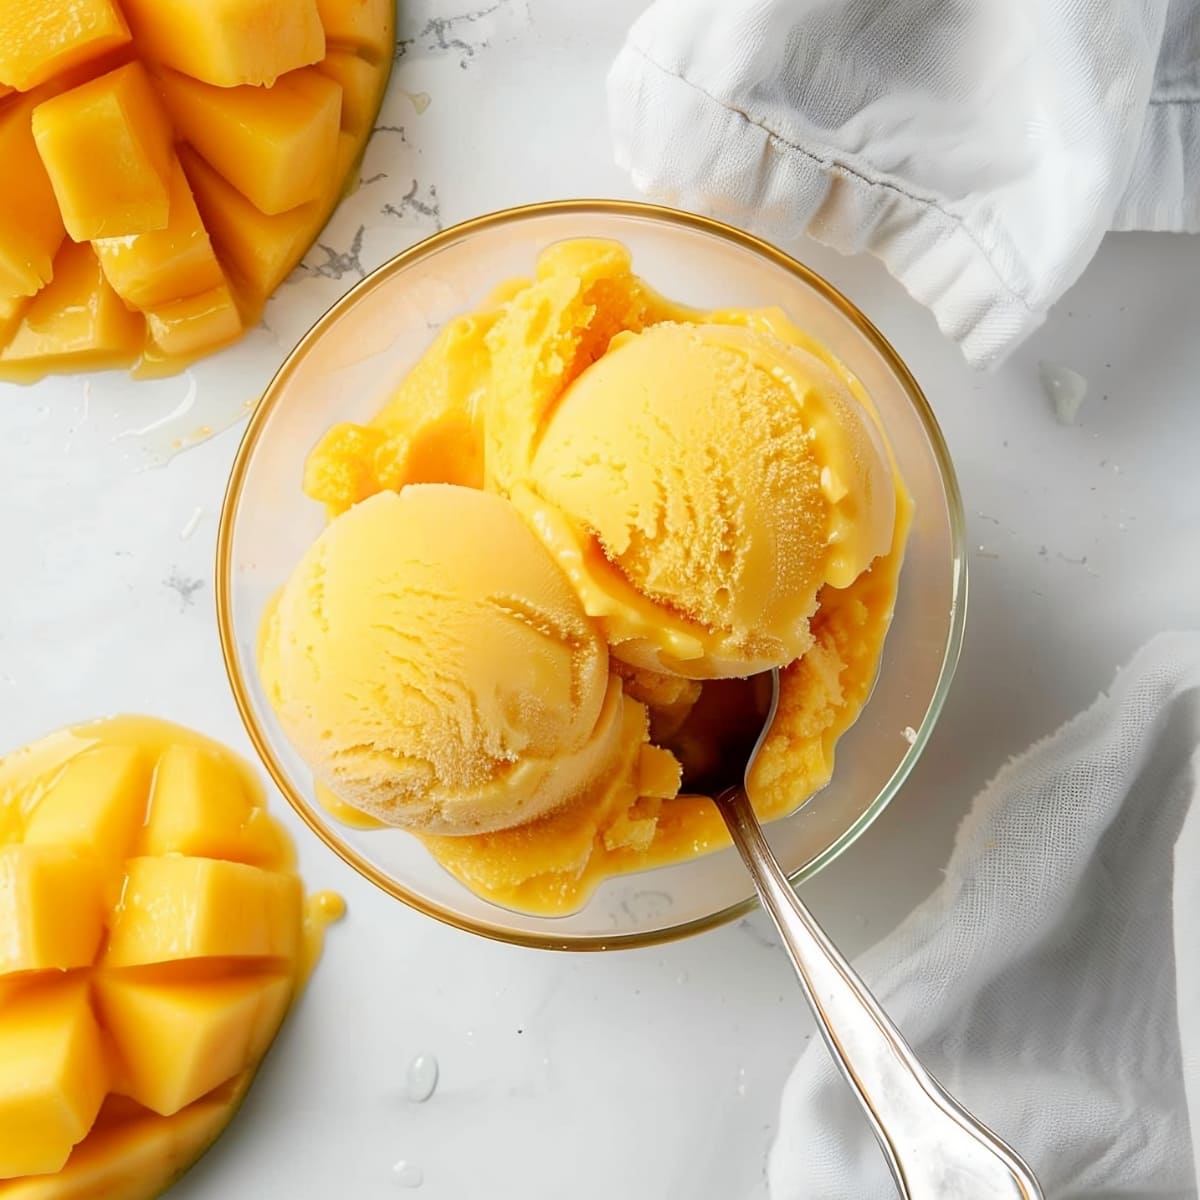 A delicious mango sorbet recipe with fresh mangoes, sugar, and lemon juice. Perfect for a refreshing summer treat.